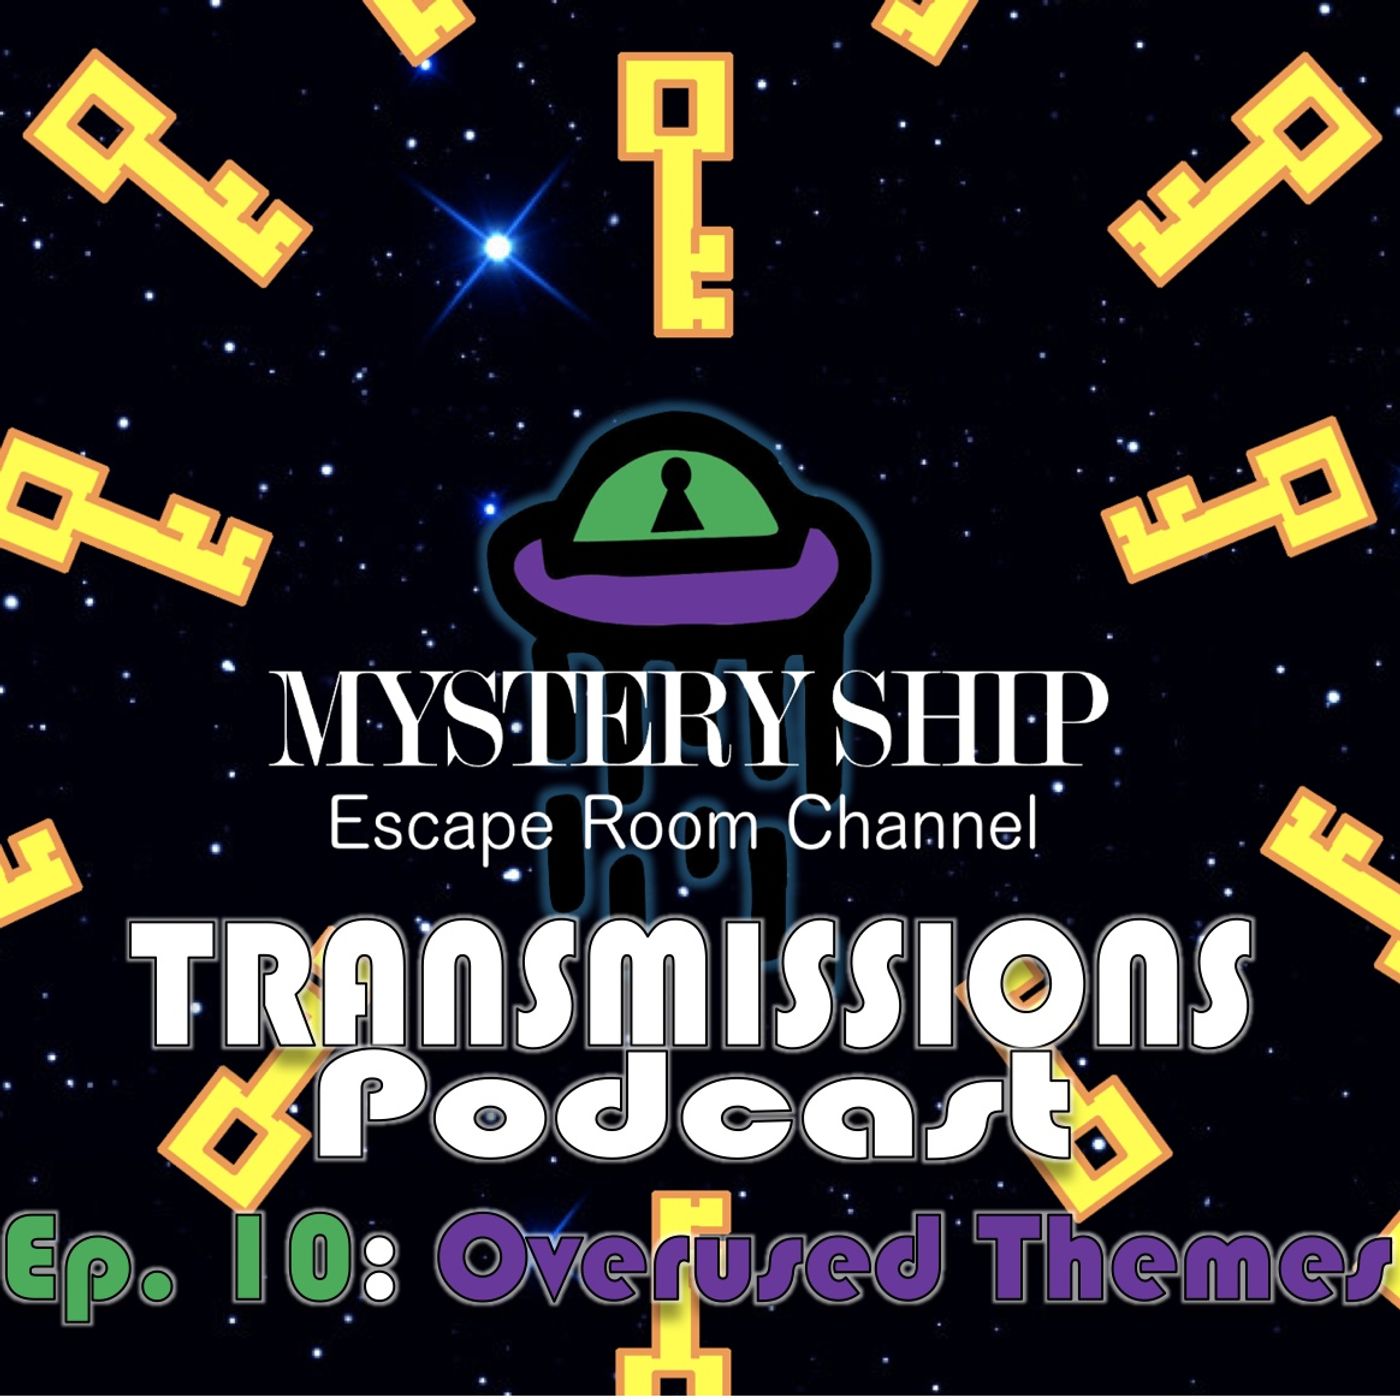 Ep10 Overused Themes for Escape Rooms - Mystery Ship Transmissions Podcast